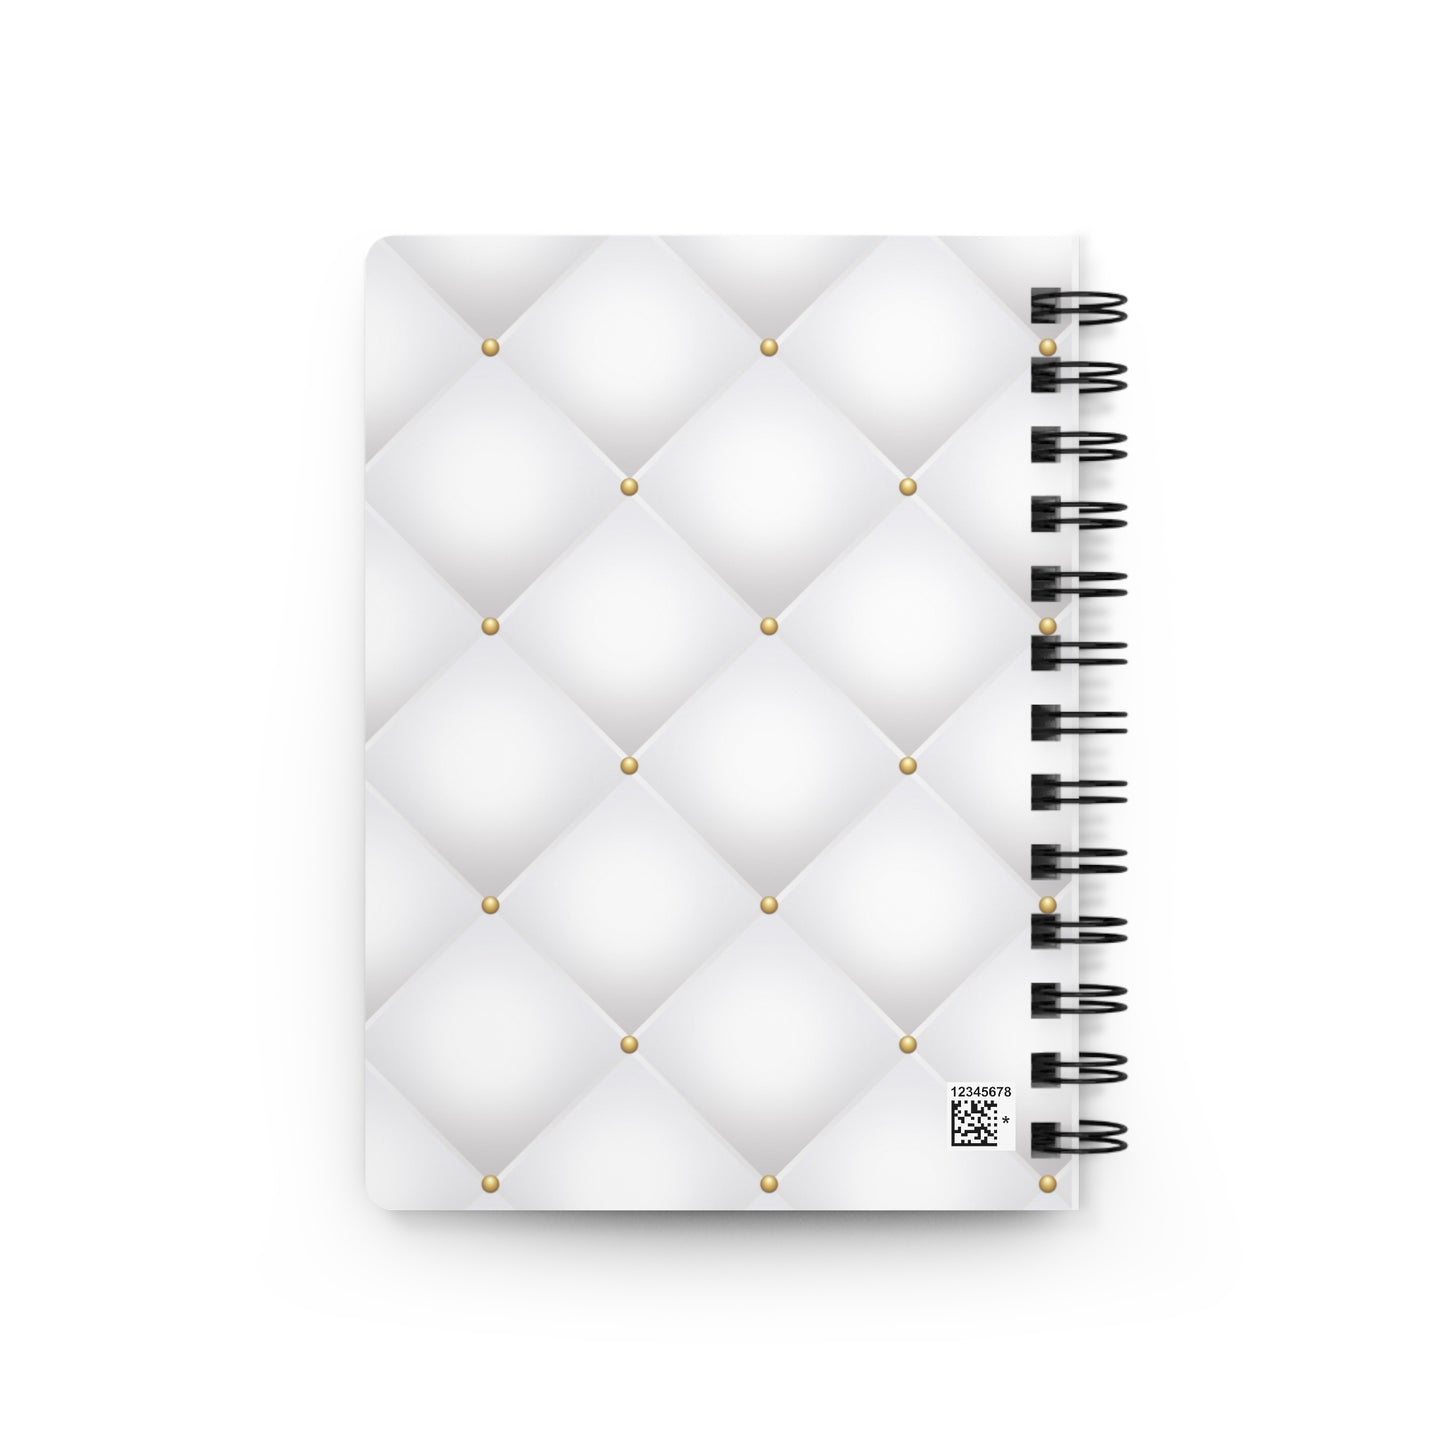 Stop for one minute Tufted Print White and Gold Spiral Bound Journal